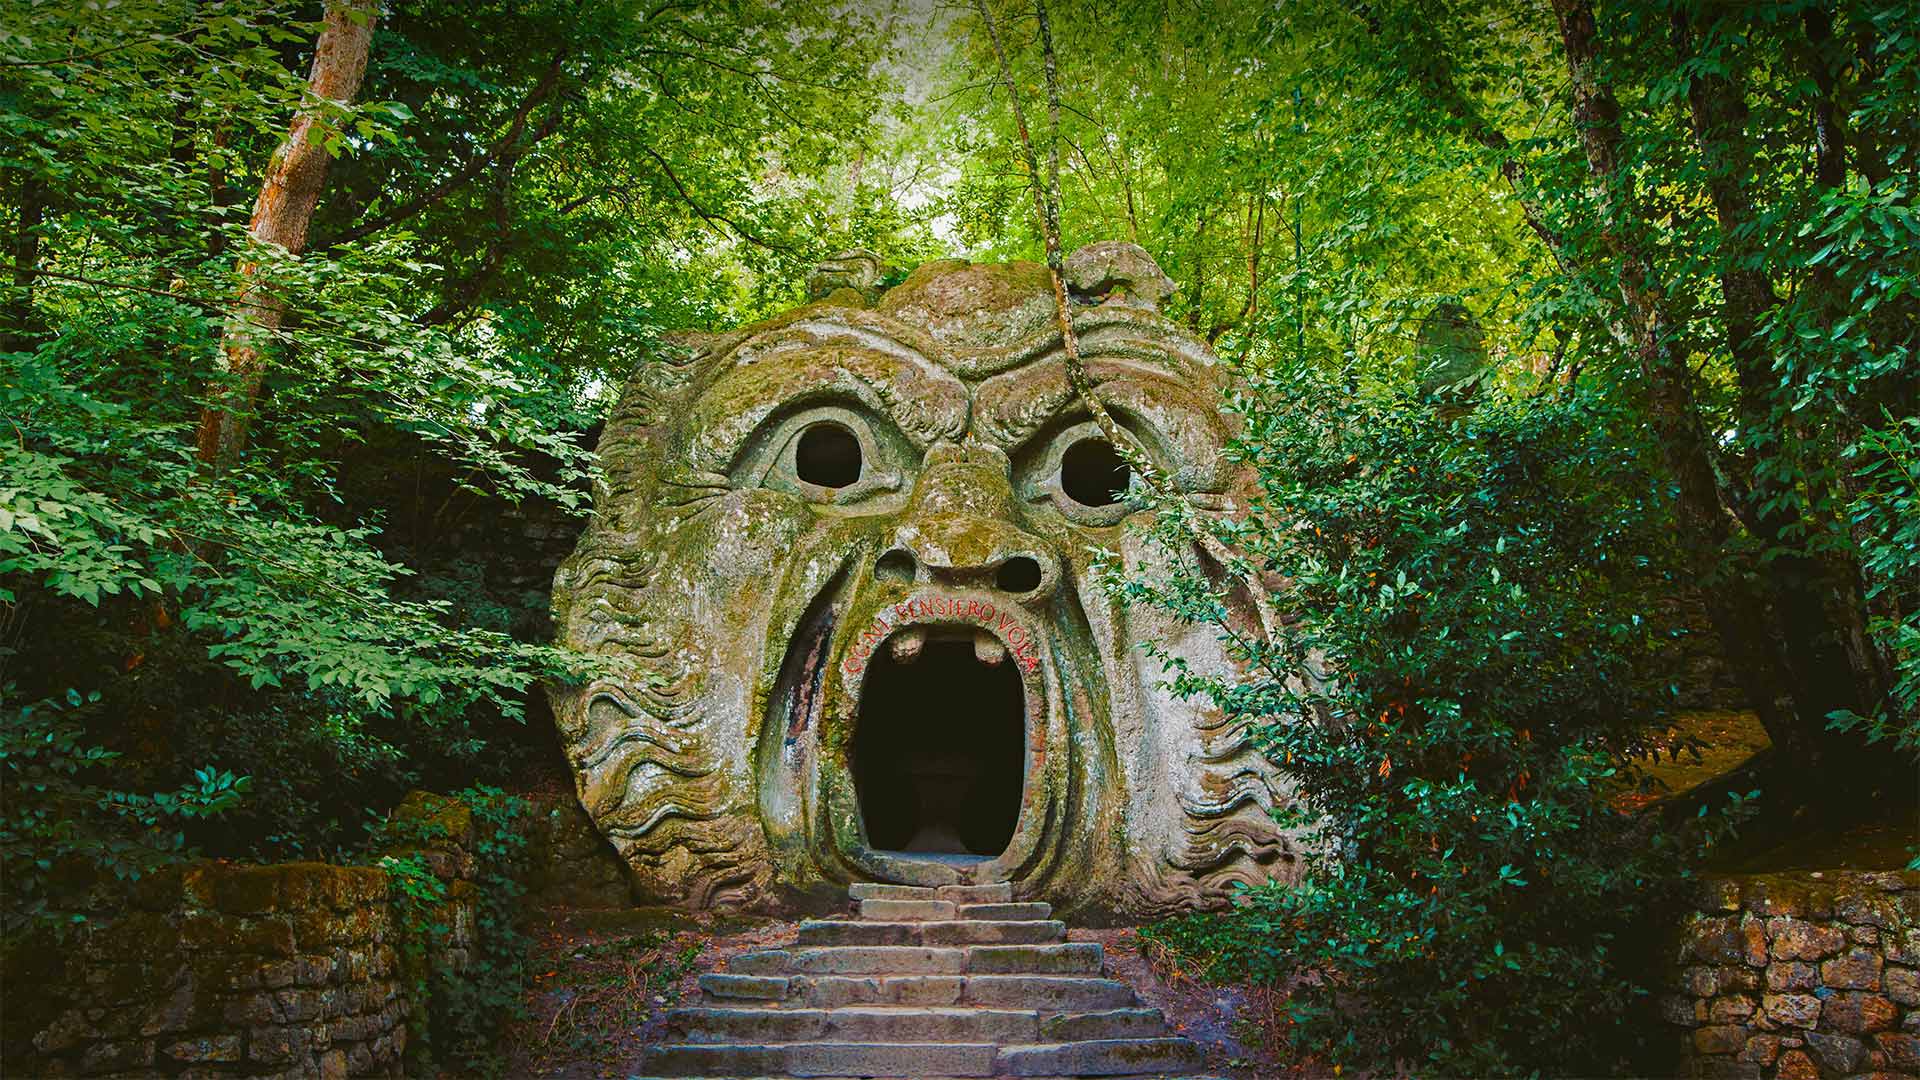 Orcus sculpture in the Gardens of Bomarzo